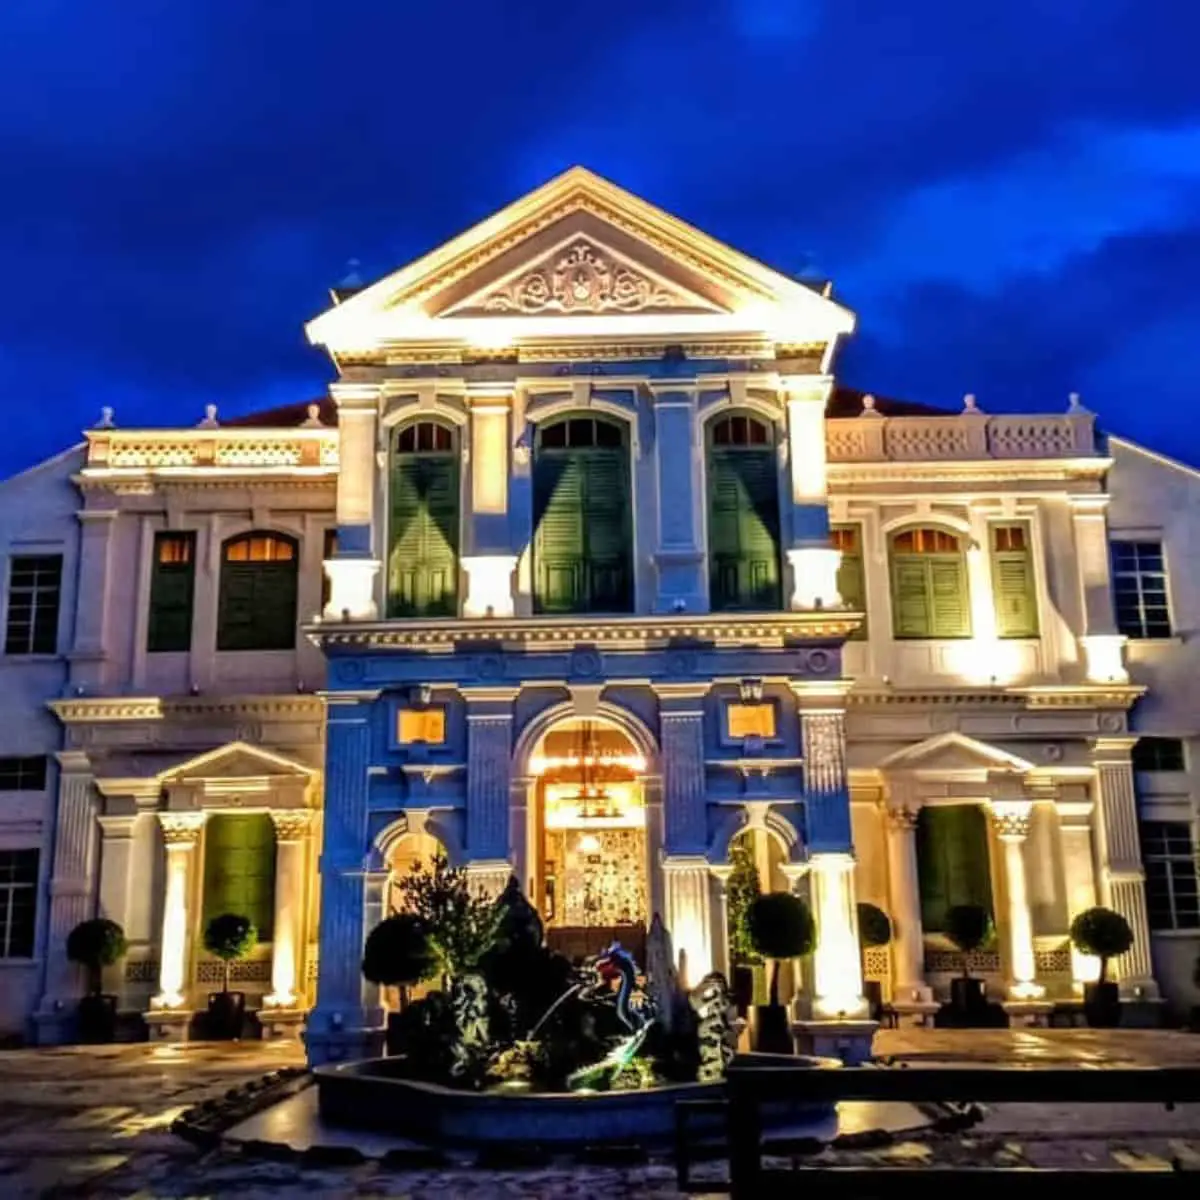 Night view of The Edison Penang Hotel with a luxurious structure